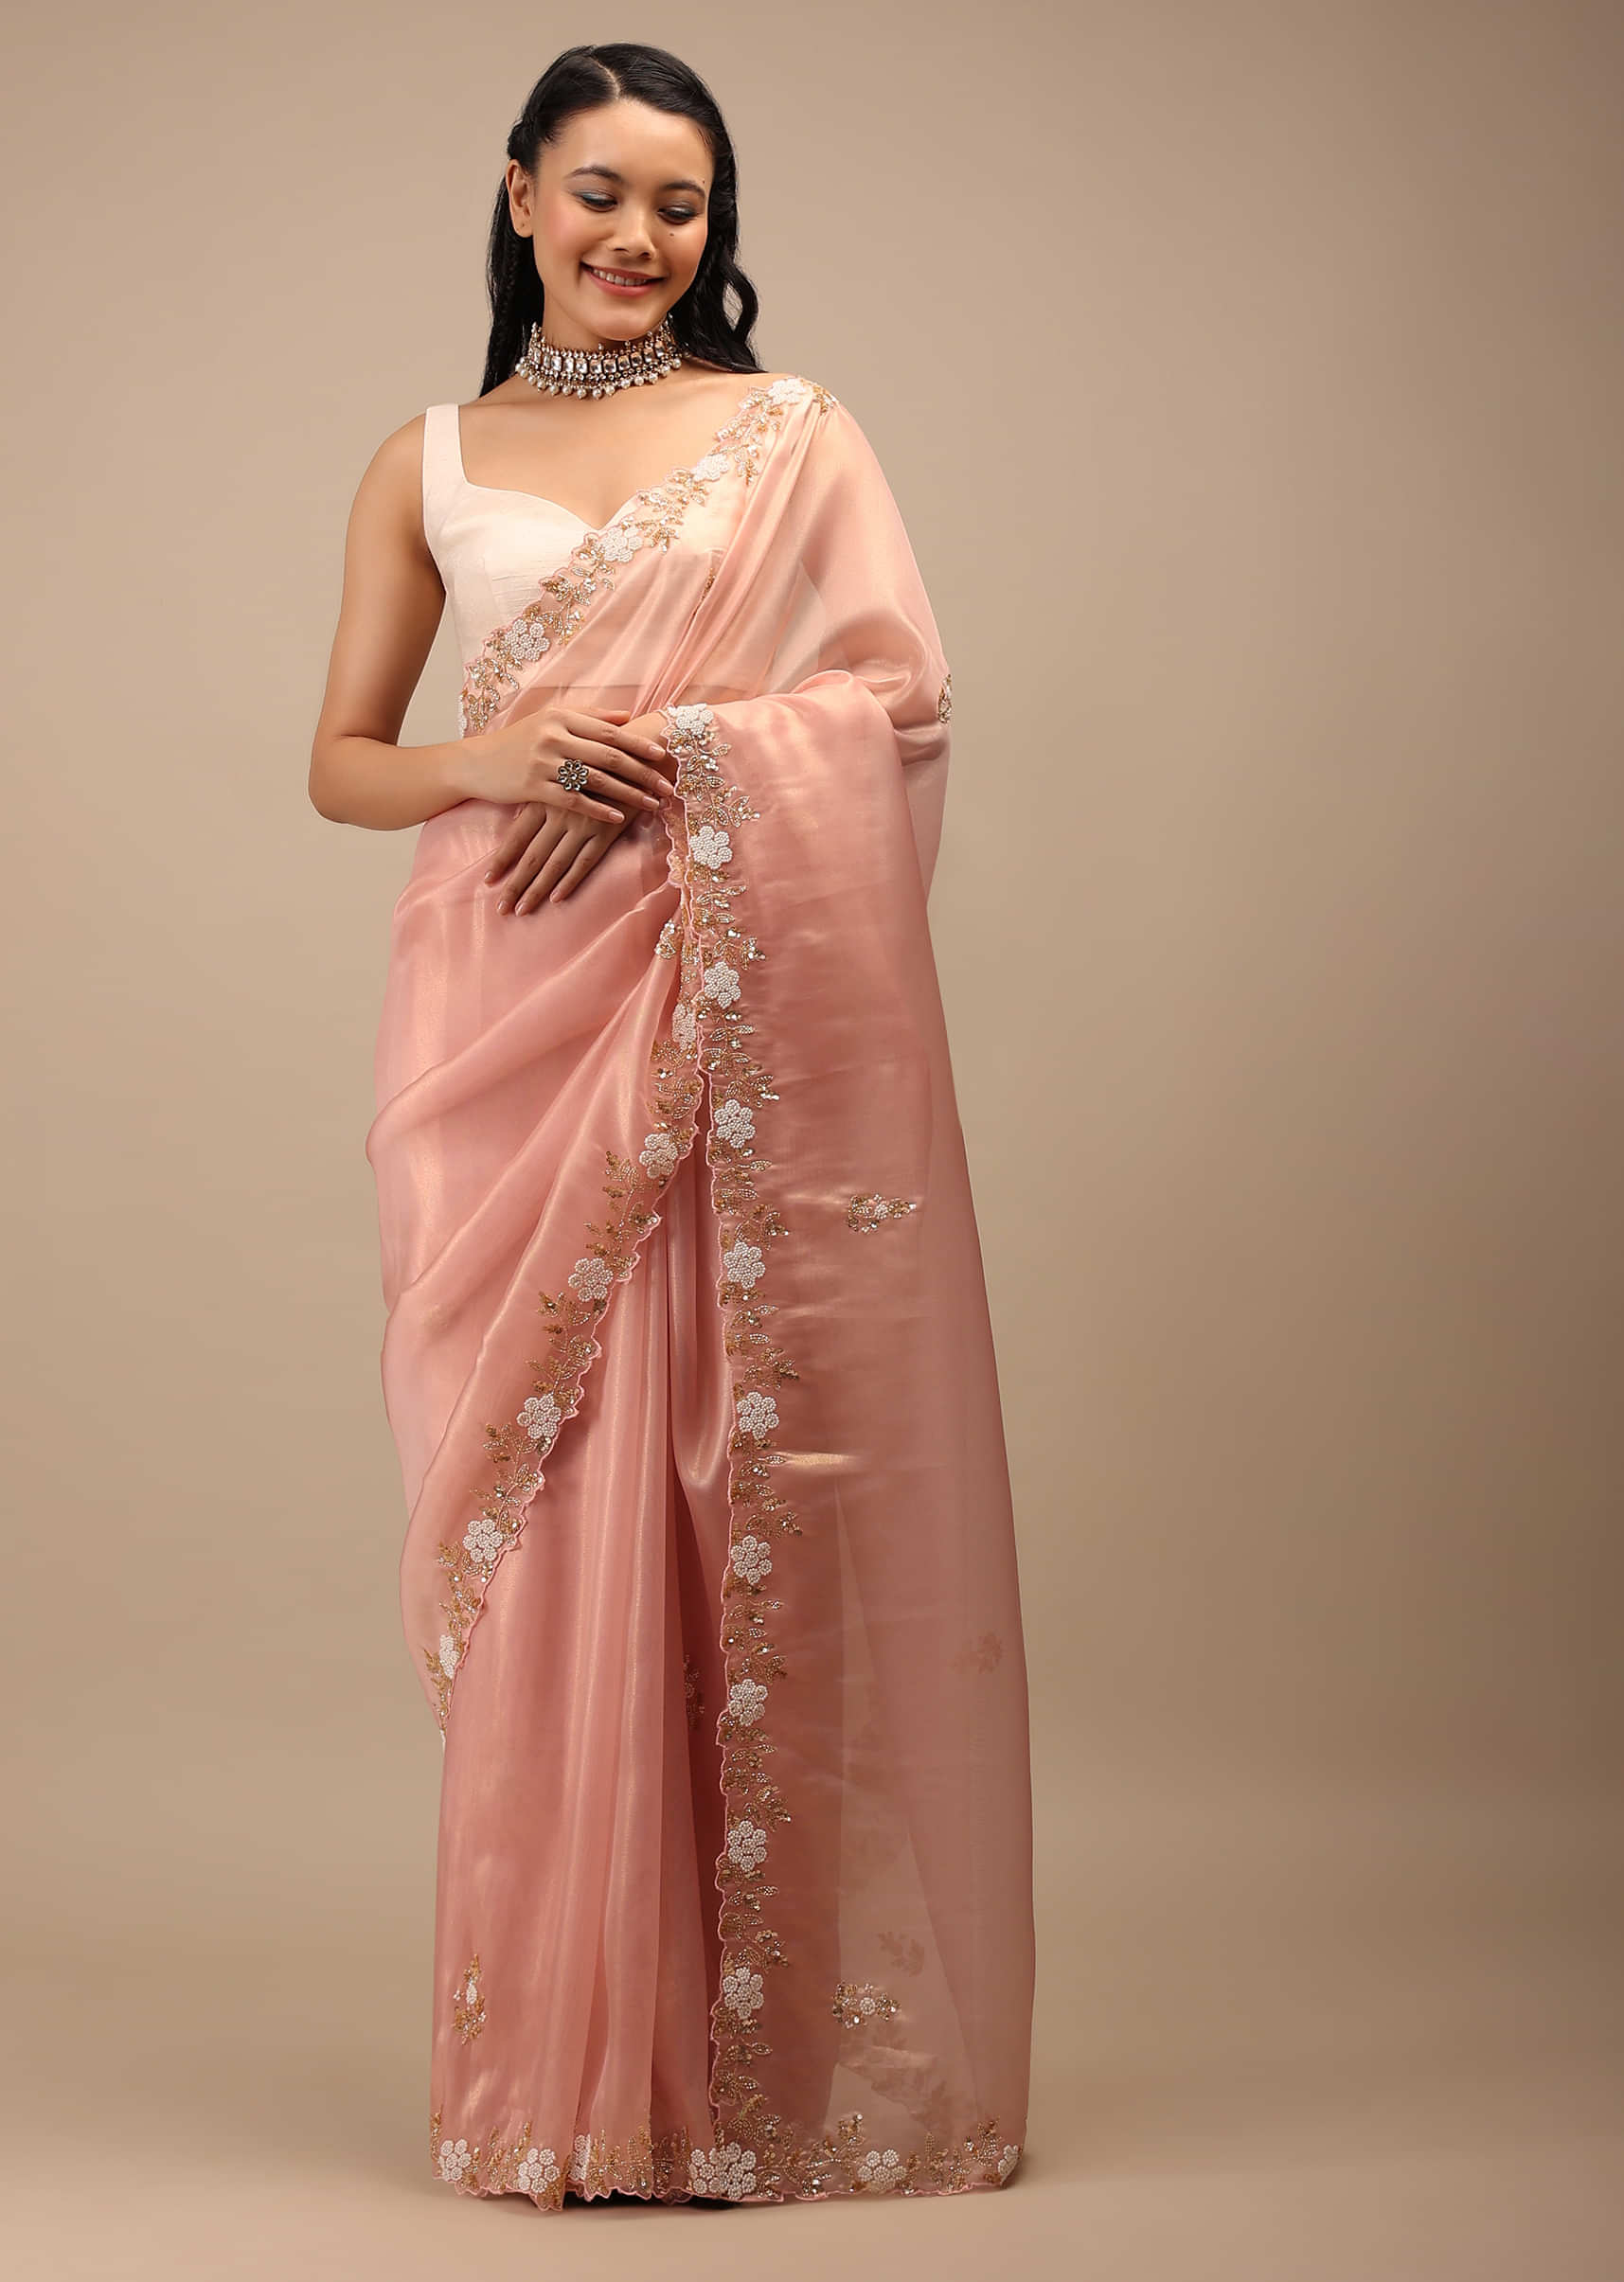 Mellow Rose Glass Tissue Saree In White Moti And Cut Dana Embroidery Buttis, Border Has Cutwork Detailing